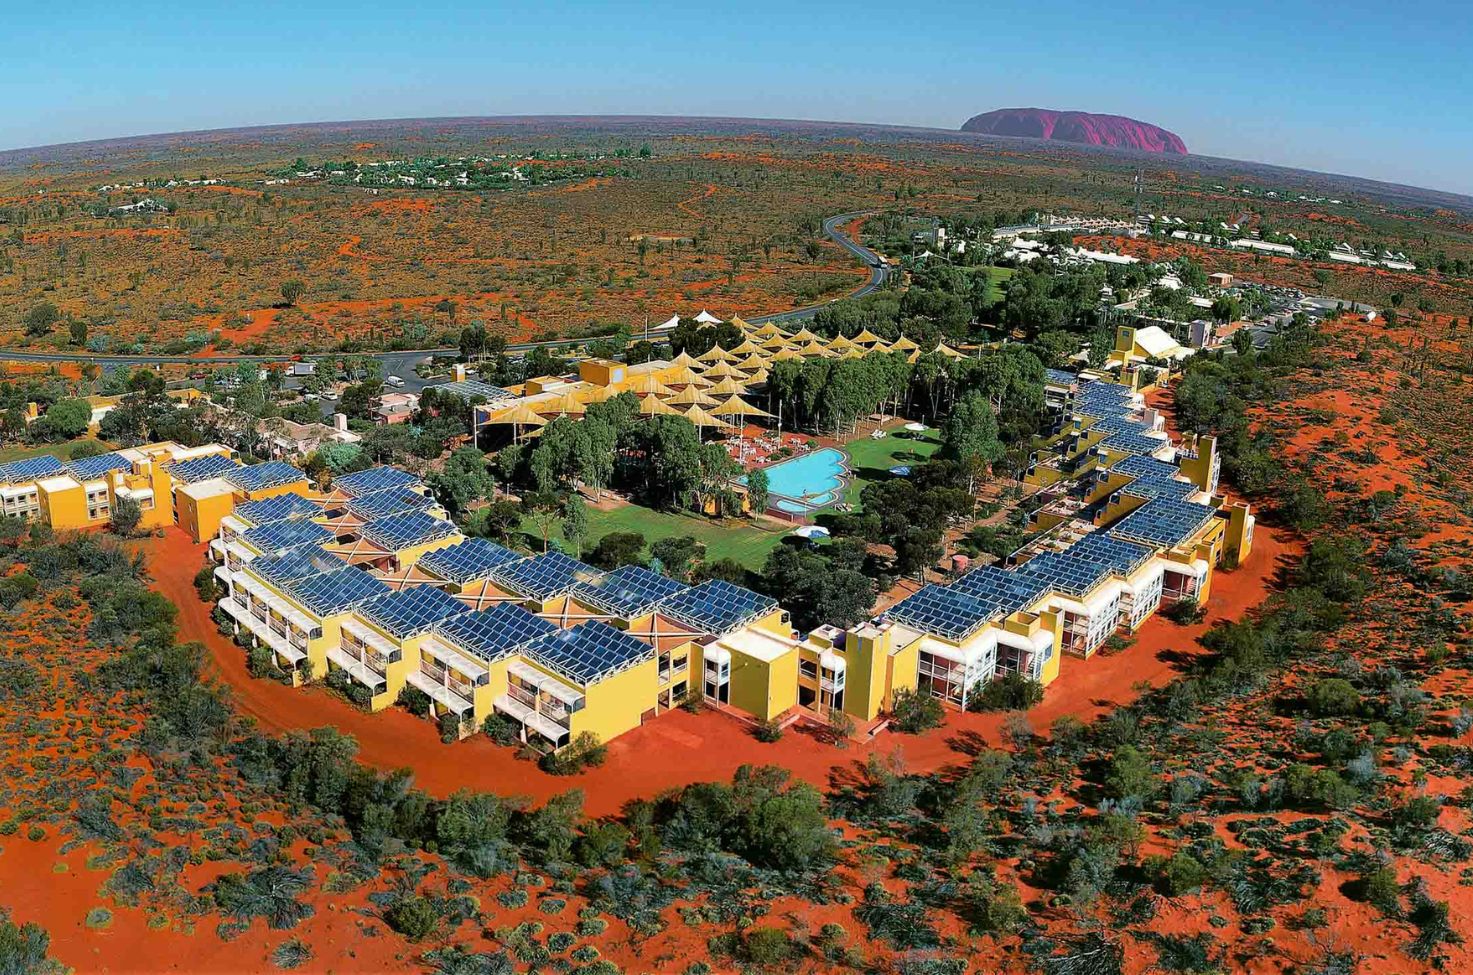 An aerial shot of the Sails in the Desert hotel in Yulara with Uluru in the background